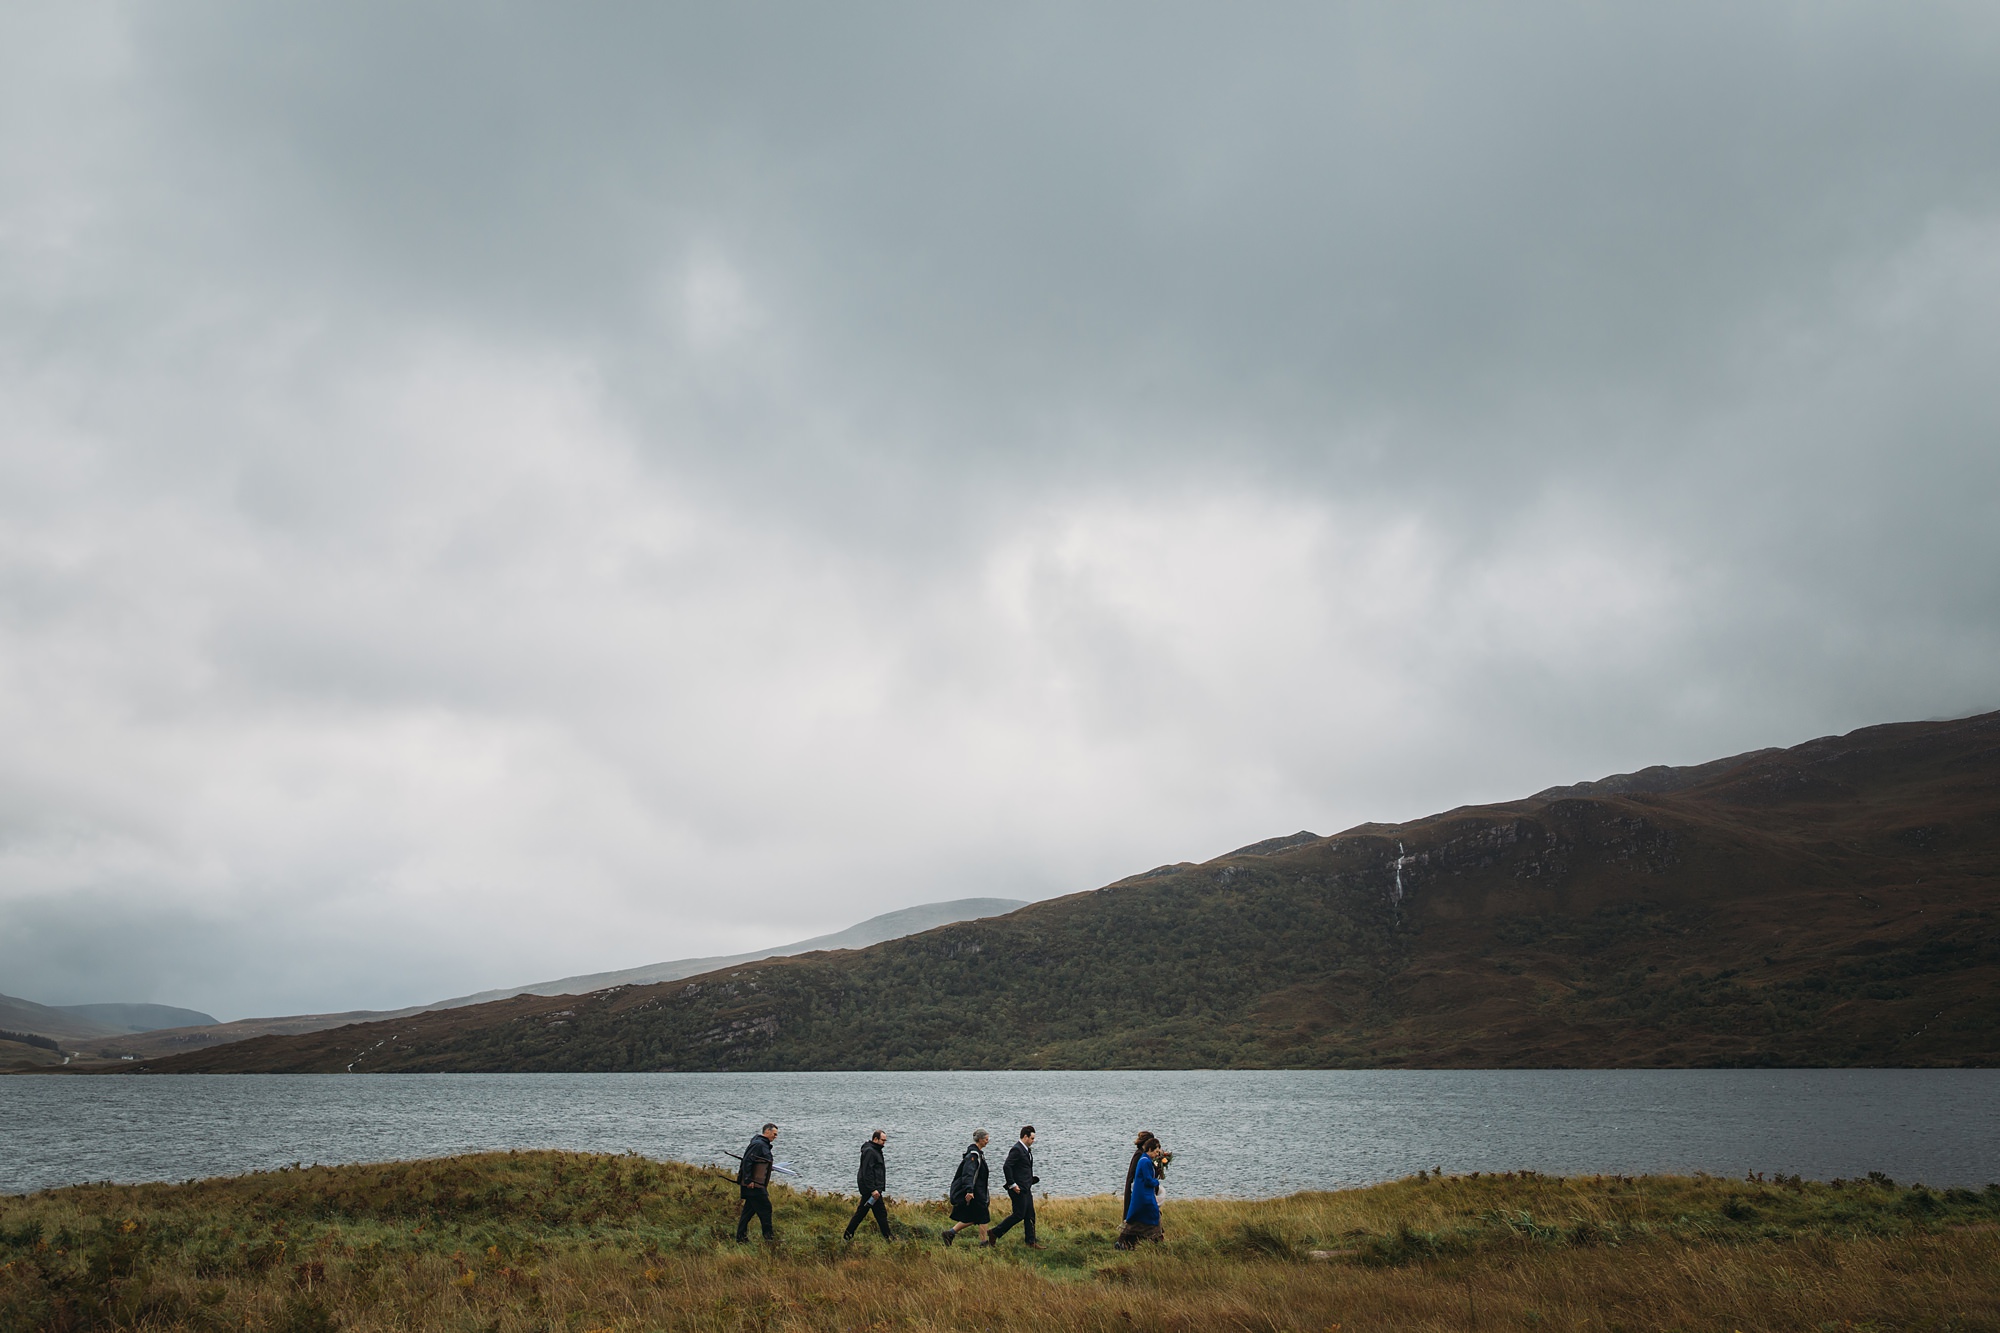 Eloping to Scotland at Lochinver and Ardvreck Castle. Small group walks to civil ceremony